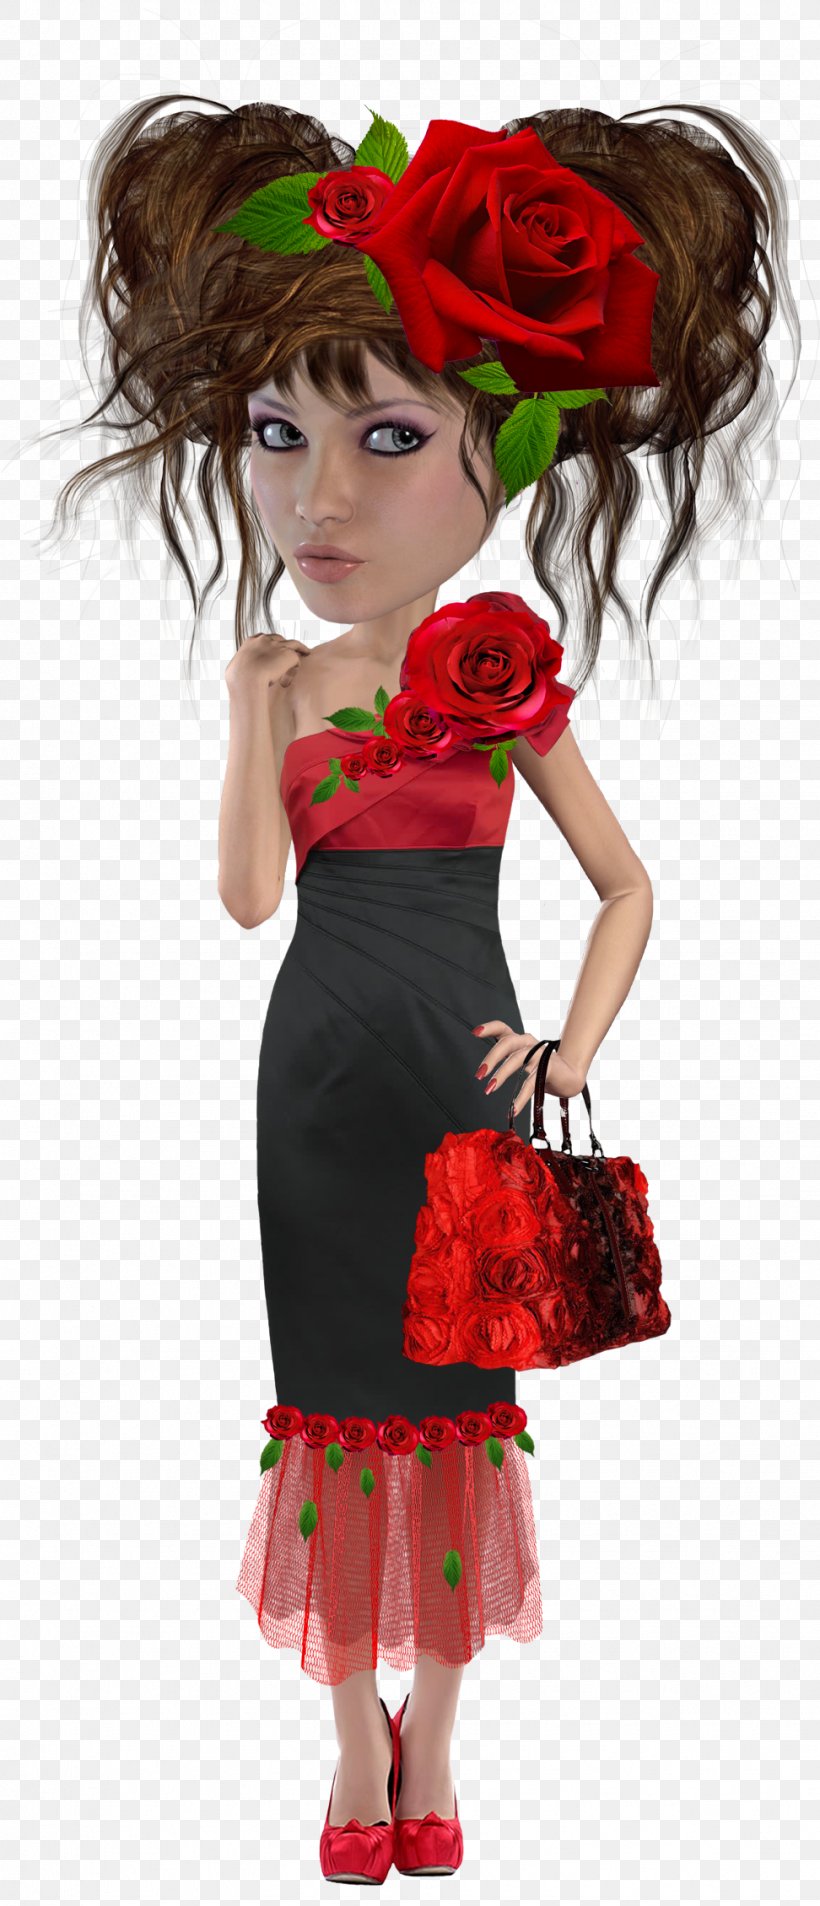 Cocktail Dress Dance Costume, PNG, 972x2260px, Cocktail Dress, Clothing, Cocktail, Costume, Dance Download Free